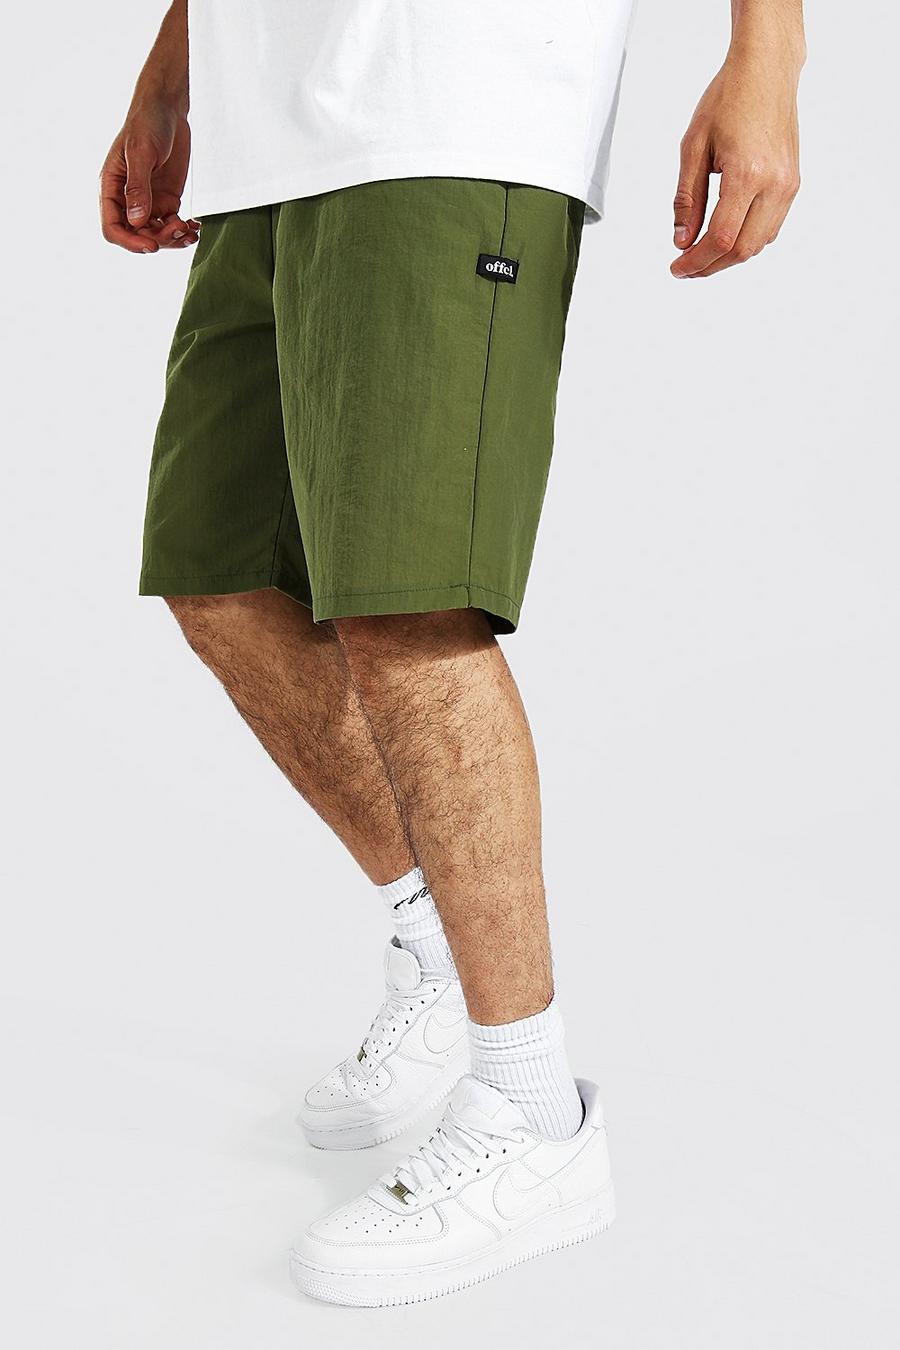 Pantaloncini Man Tall in tessuto Shell goffrato con fermacorde, Khaki image number 1